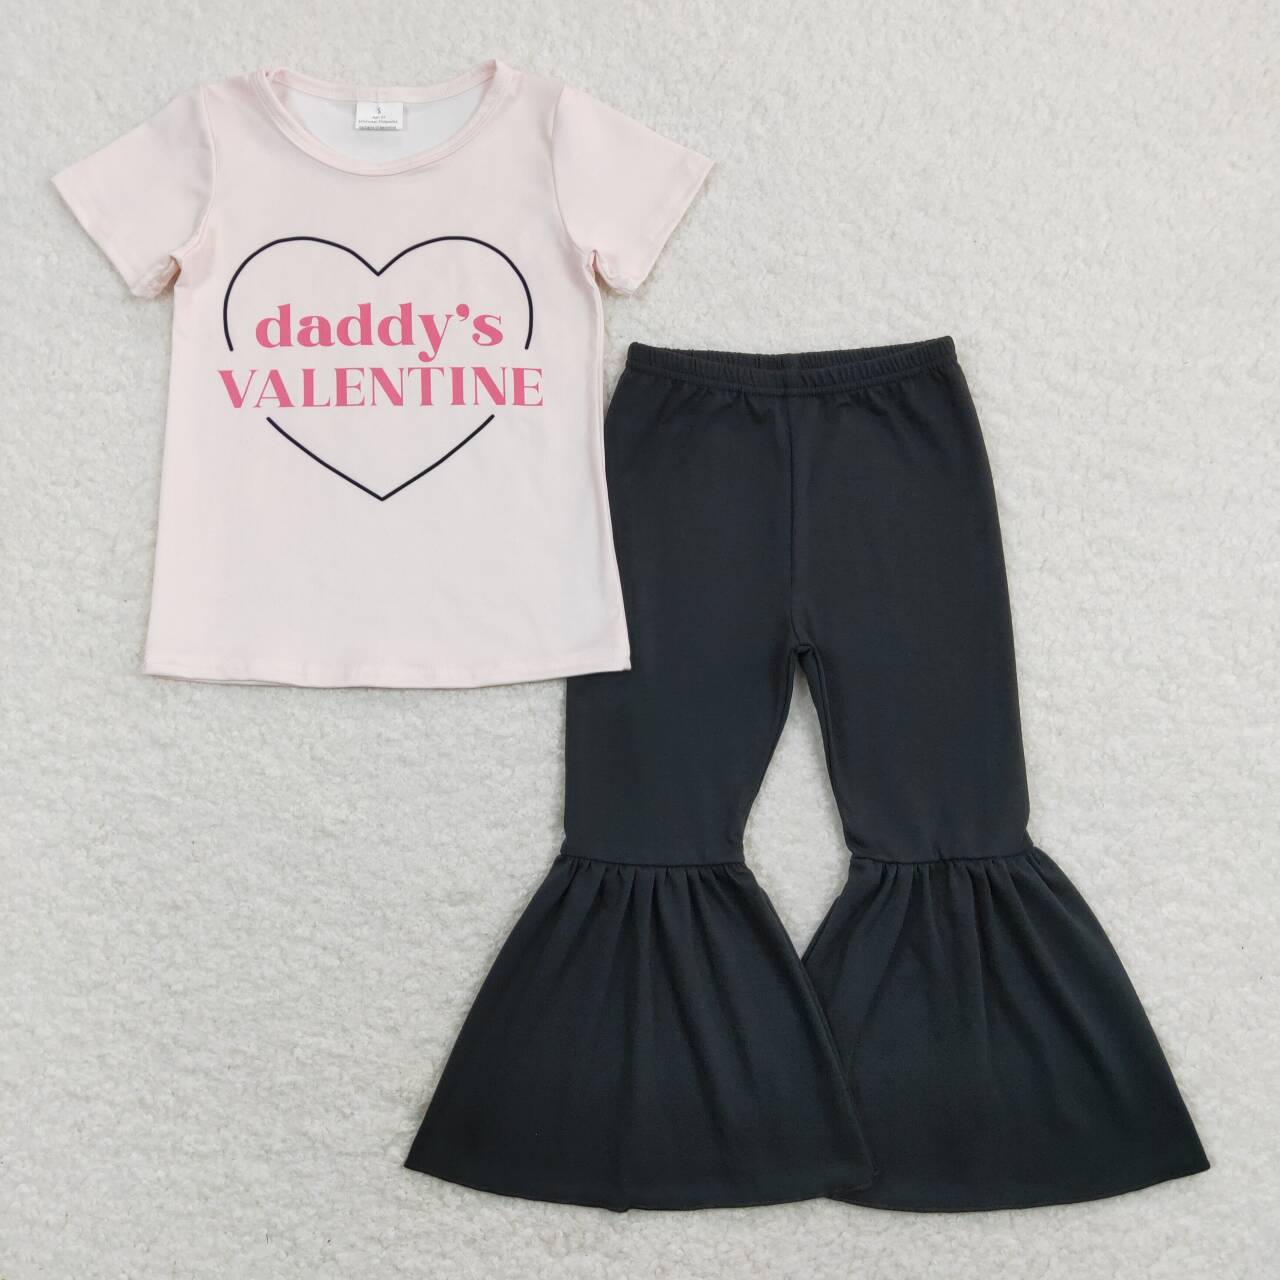 daddy's valentine girls outfit